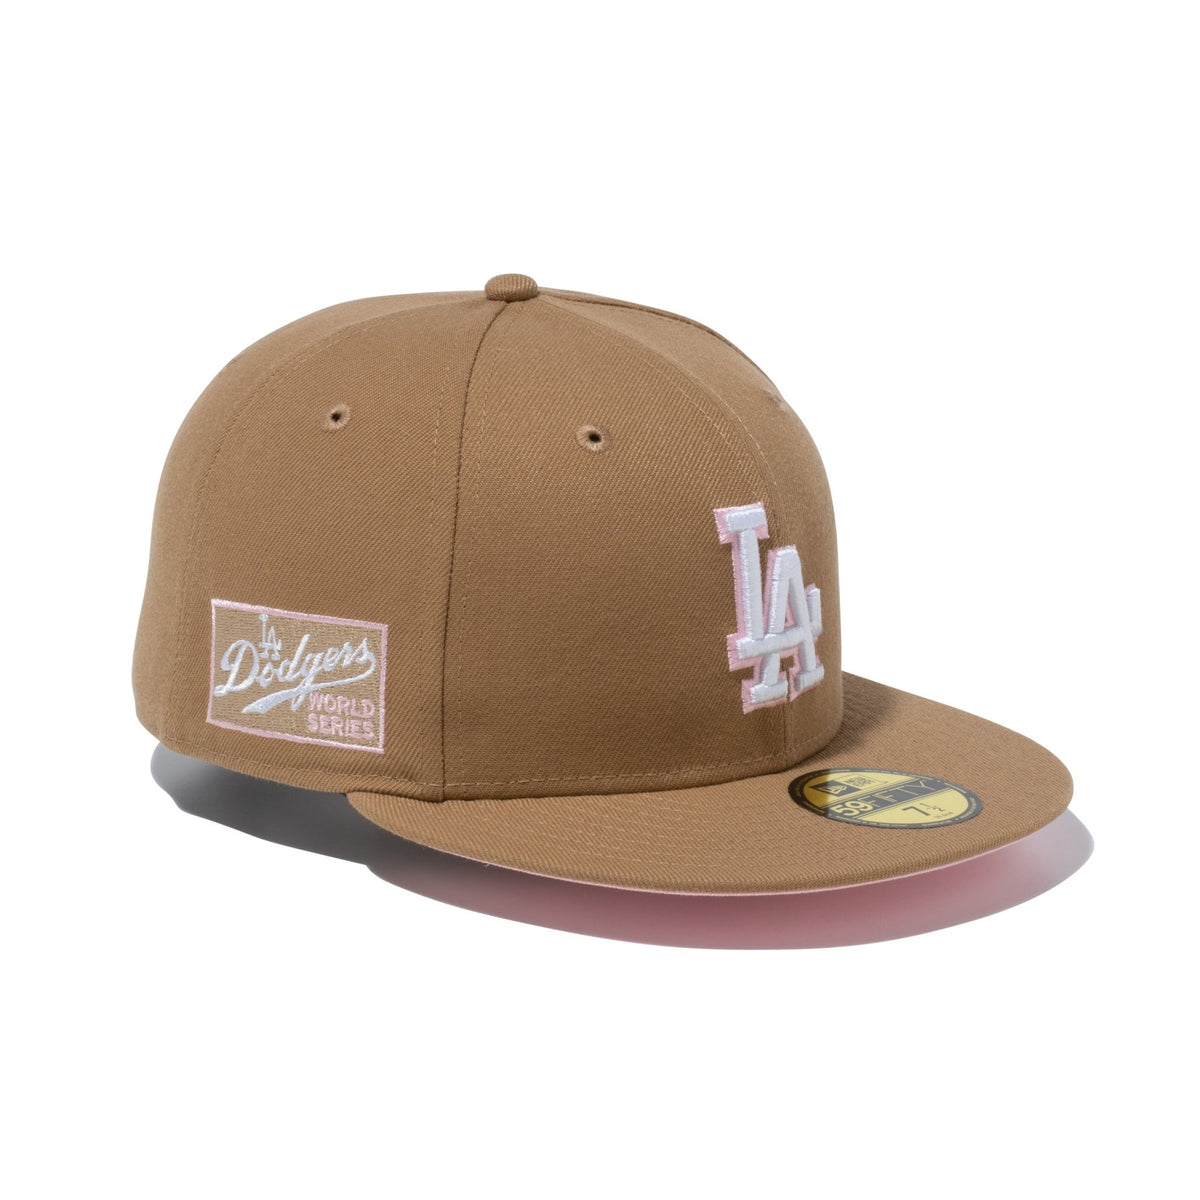 59FIFTY MLB Pink Pack ロサンゼルス・ドジャース カーキ ピンク 